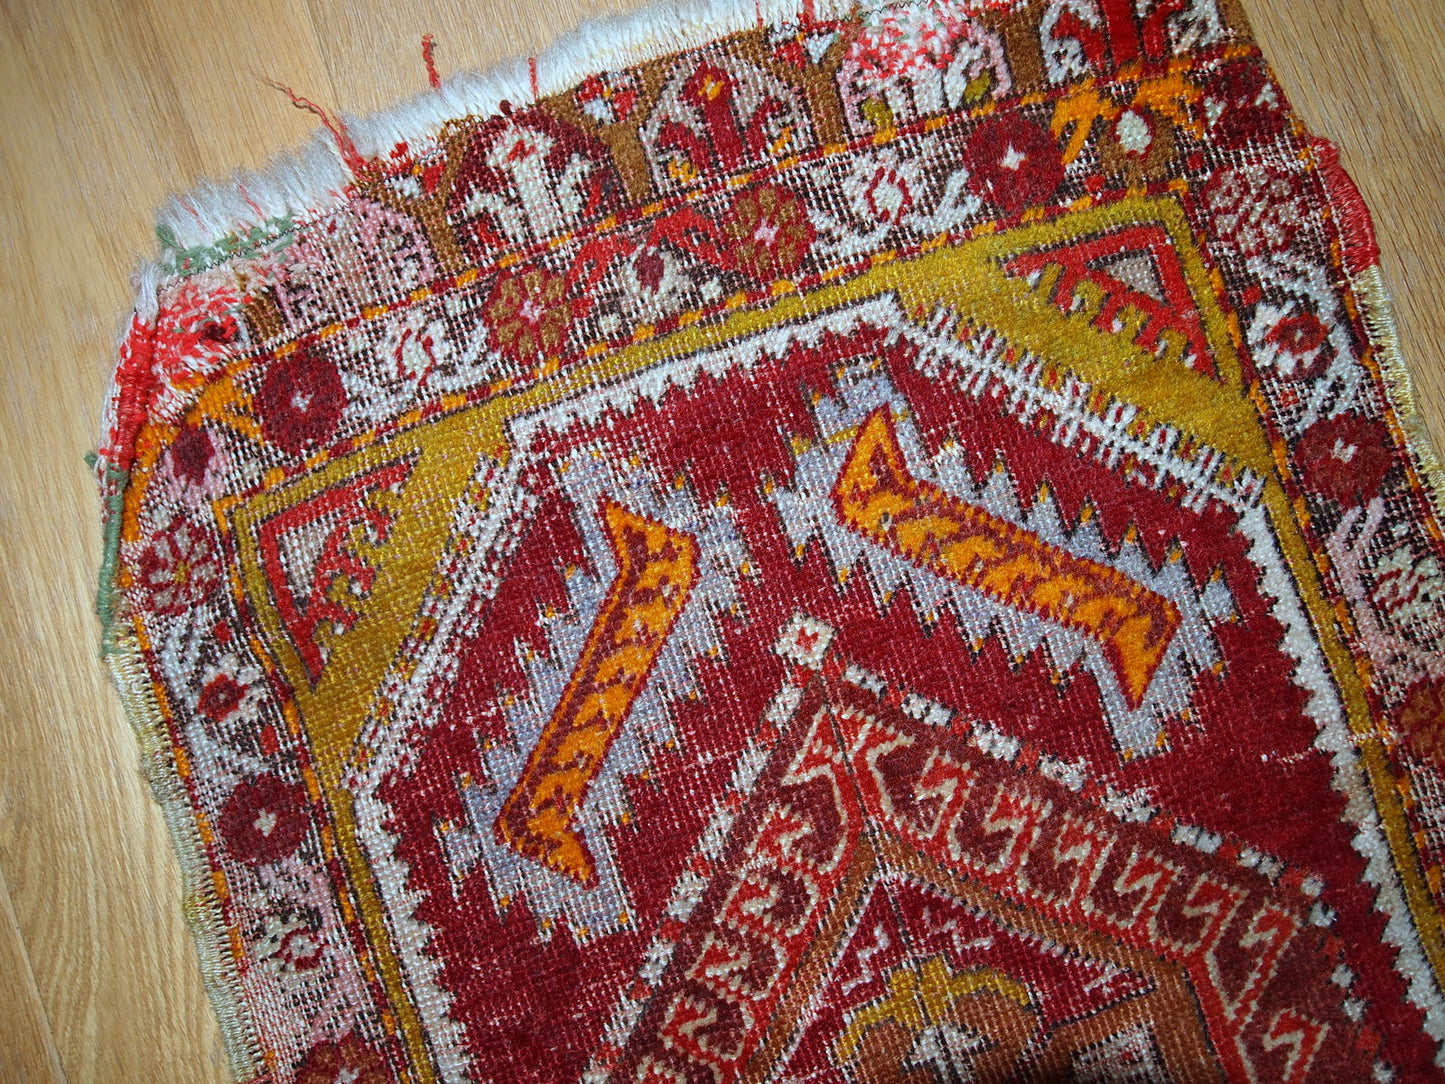 Antique Turkish Yastik rug in distressed condition. The rug made in red color with some accents of gold, orange and olive brown shades. 